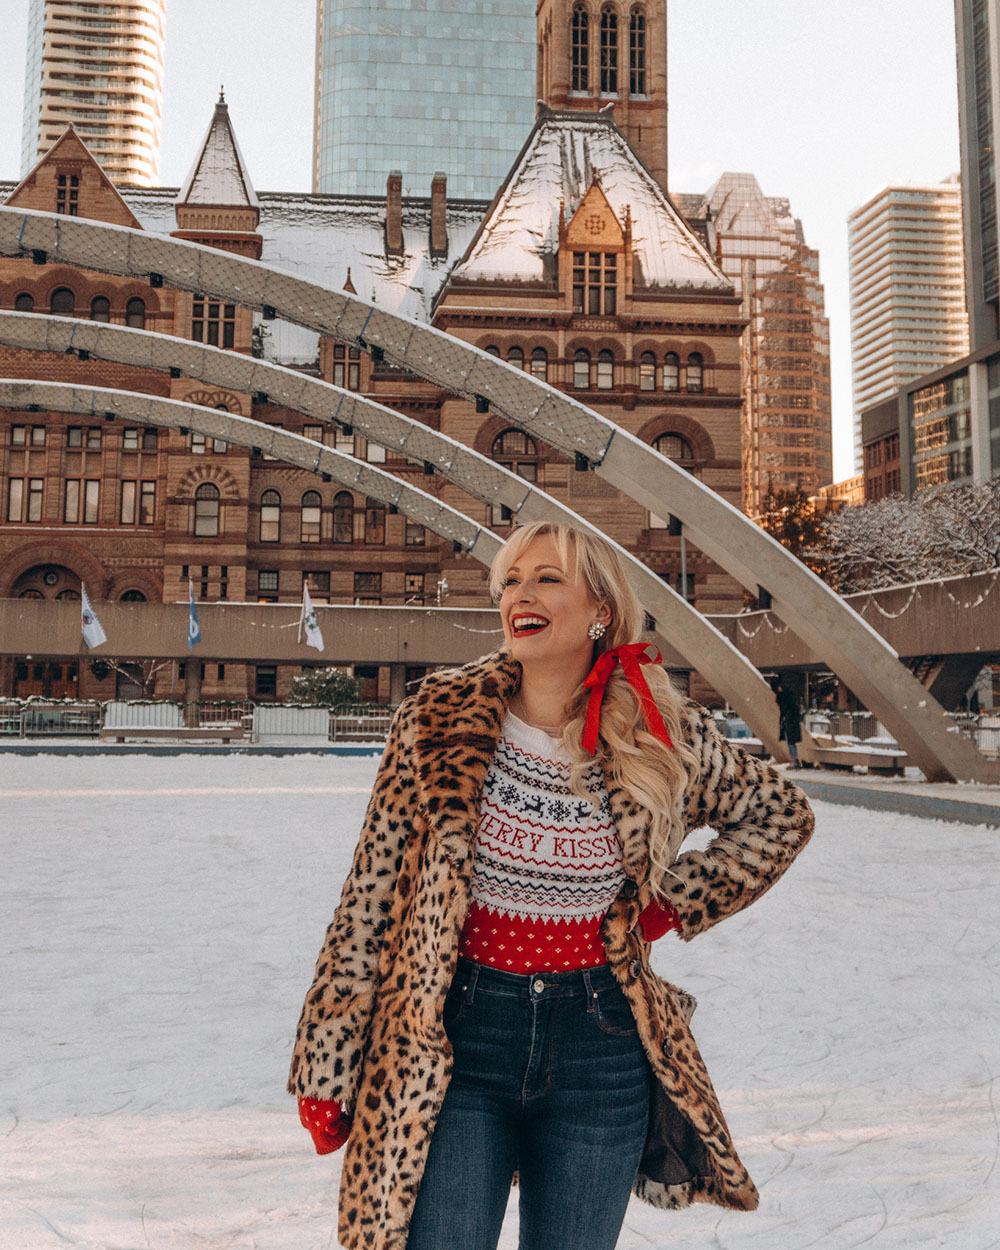 If you're planning on visiting Toronto soon and hoping to get some great photos while you're there, you definitely don't want to miss this guide on the most instagrammable places in Toronto, outdoor edition! This guide features all sorts of incredible outdoor photography locations in Toronto and the GTA. Pictured here: Nathan Phillips Square